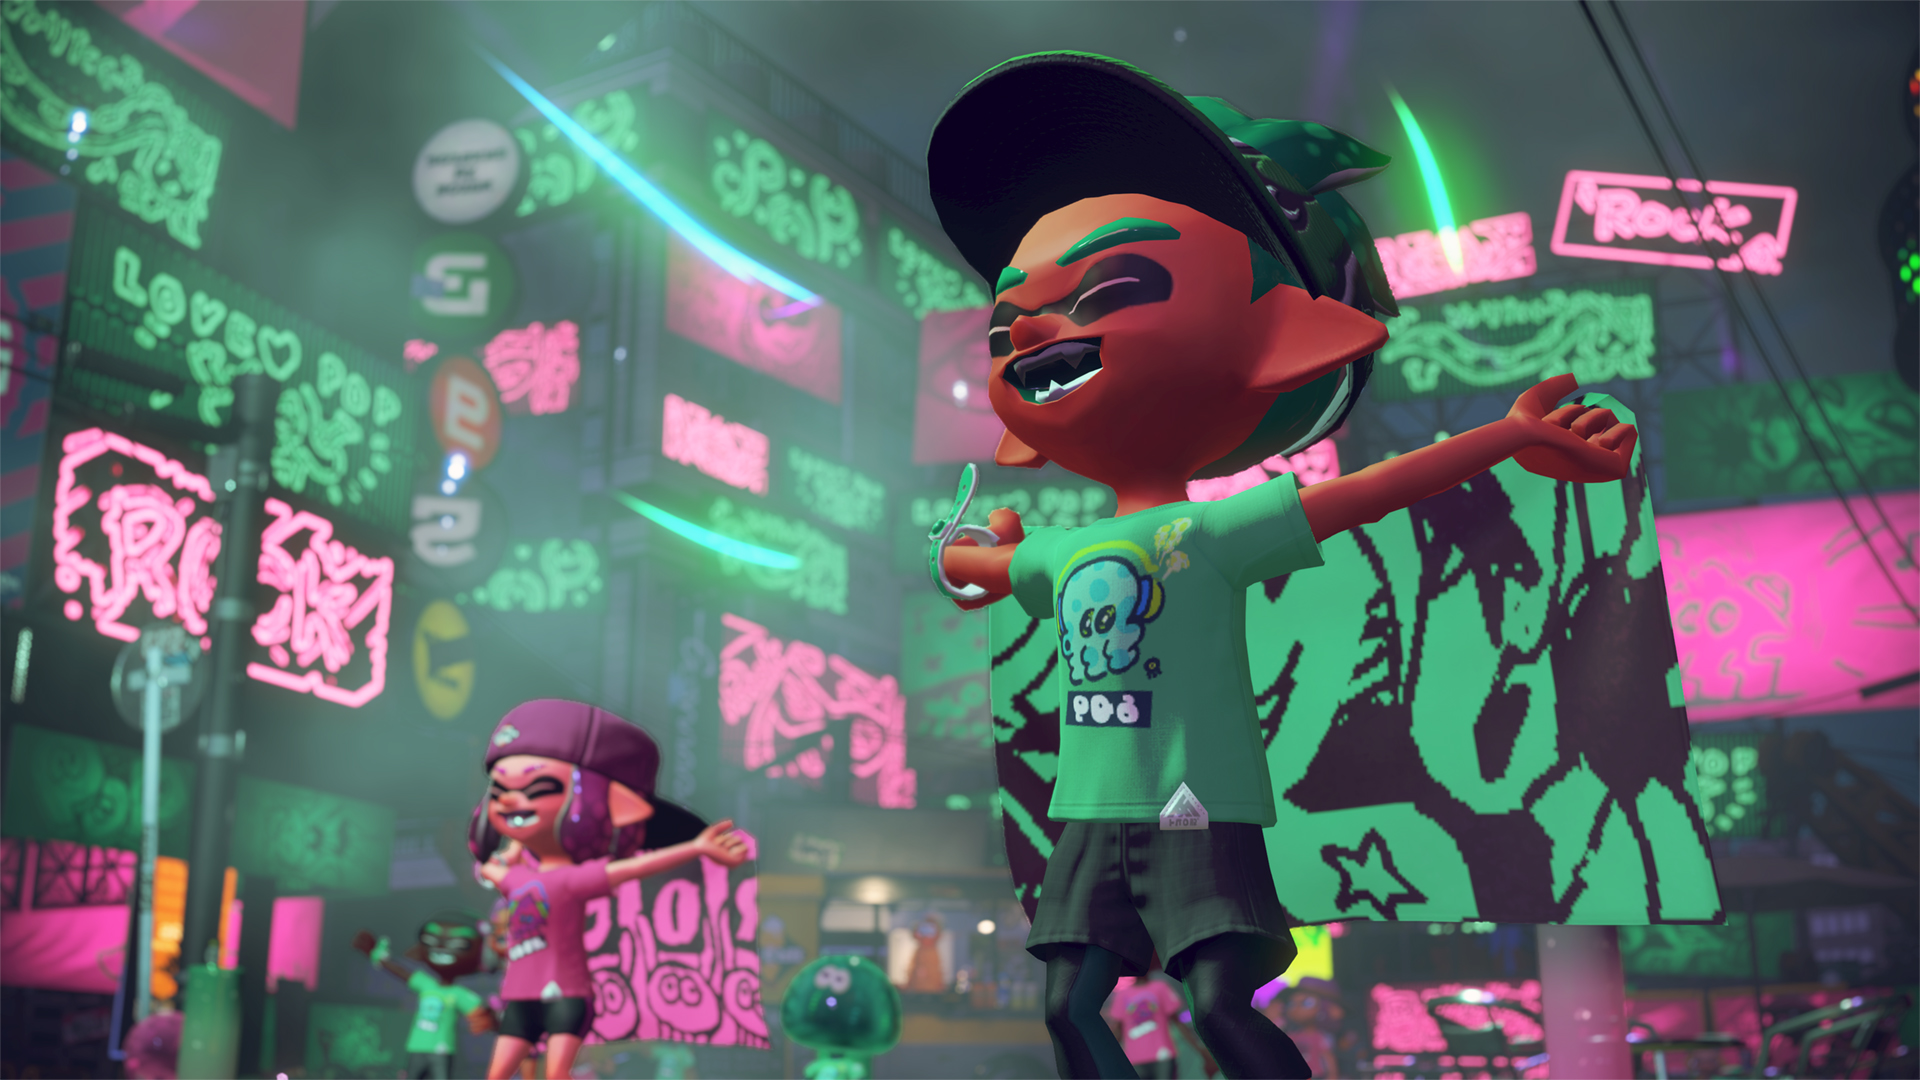 Splatoon 2 is the First Nintendo Switch Title to Sell Over 2 Million Units in Japan